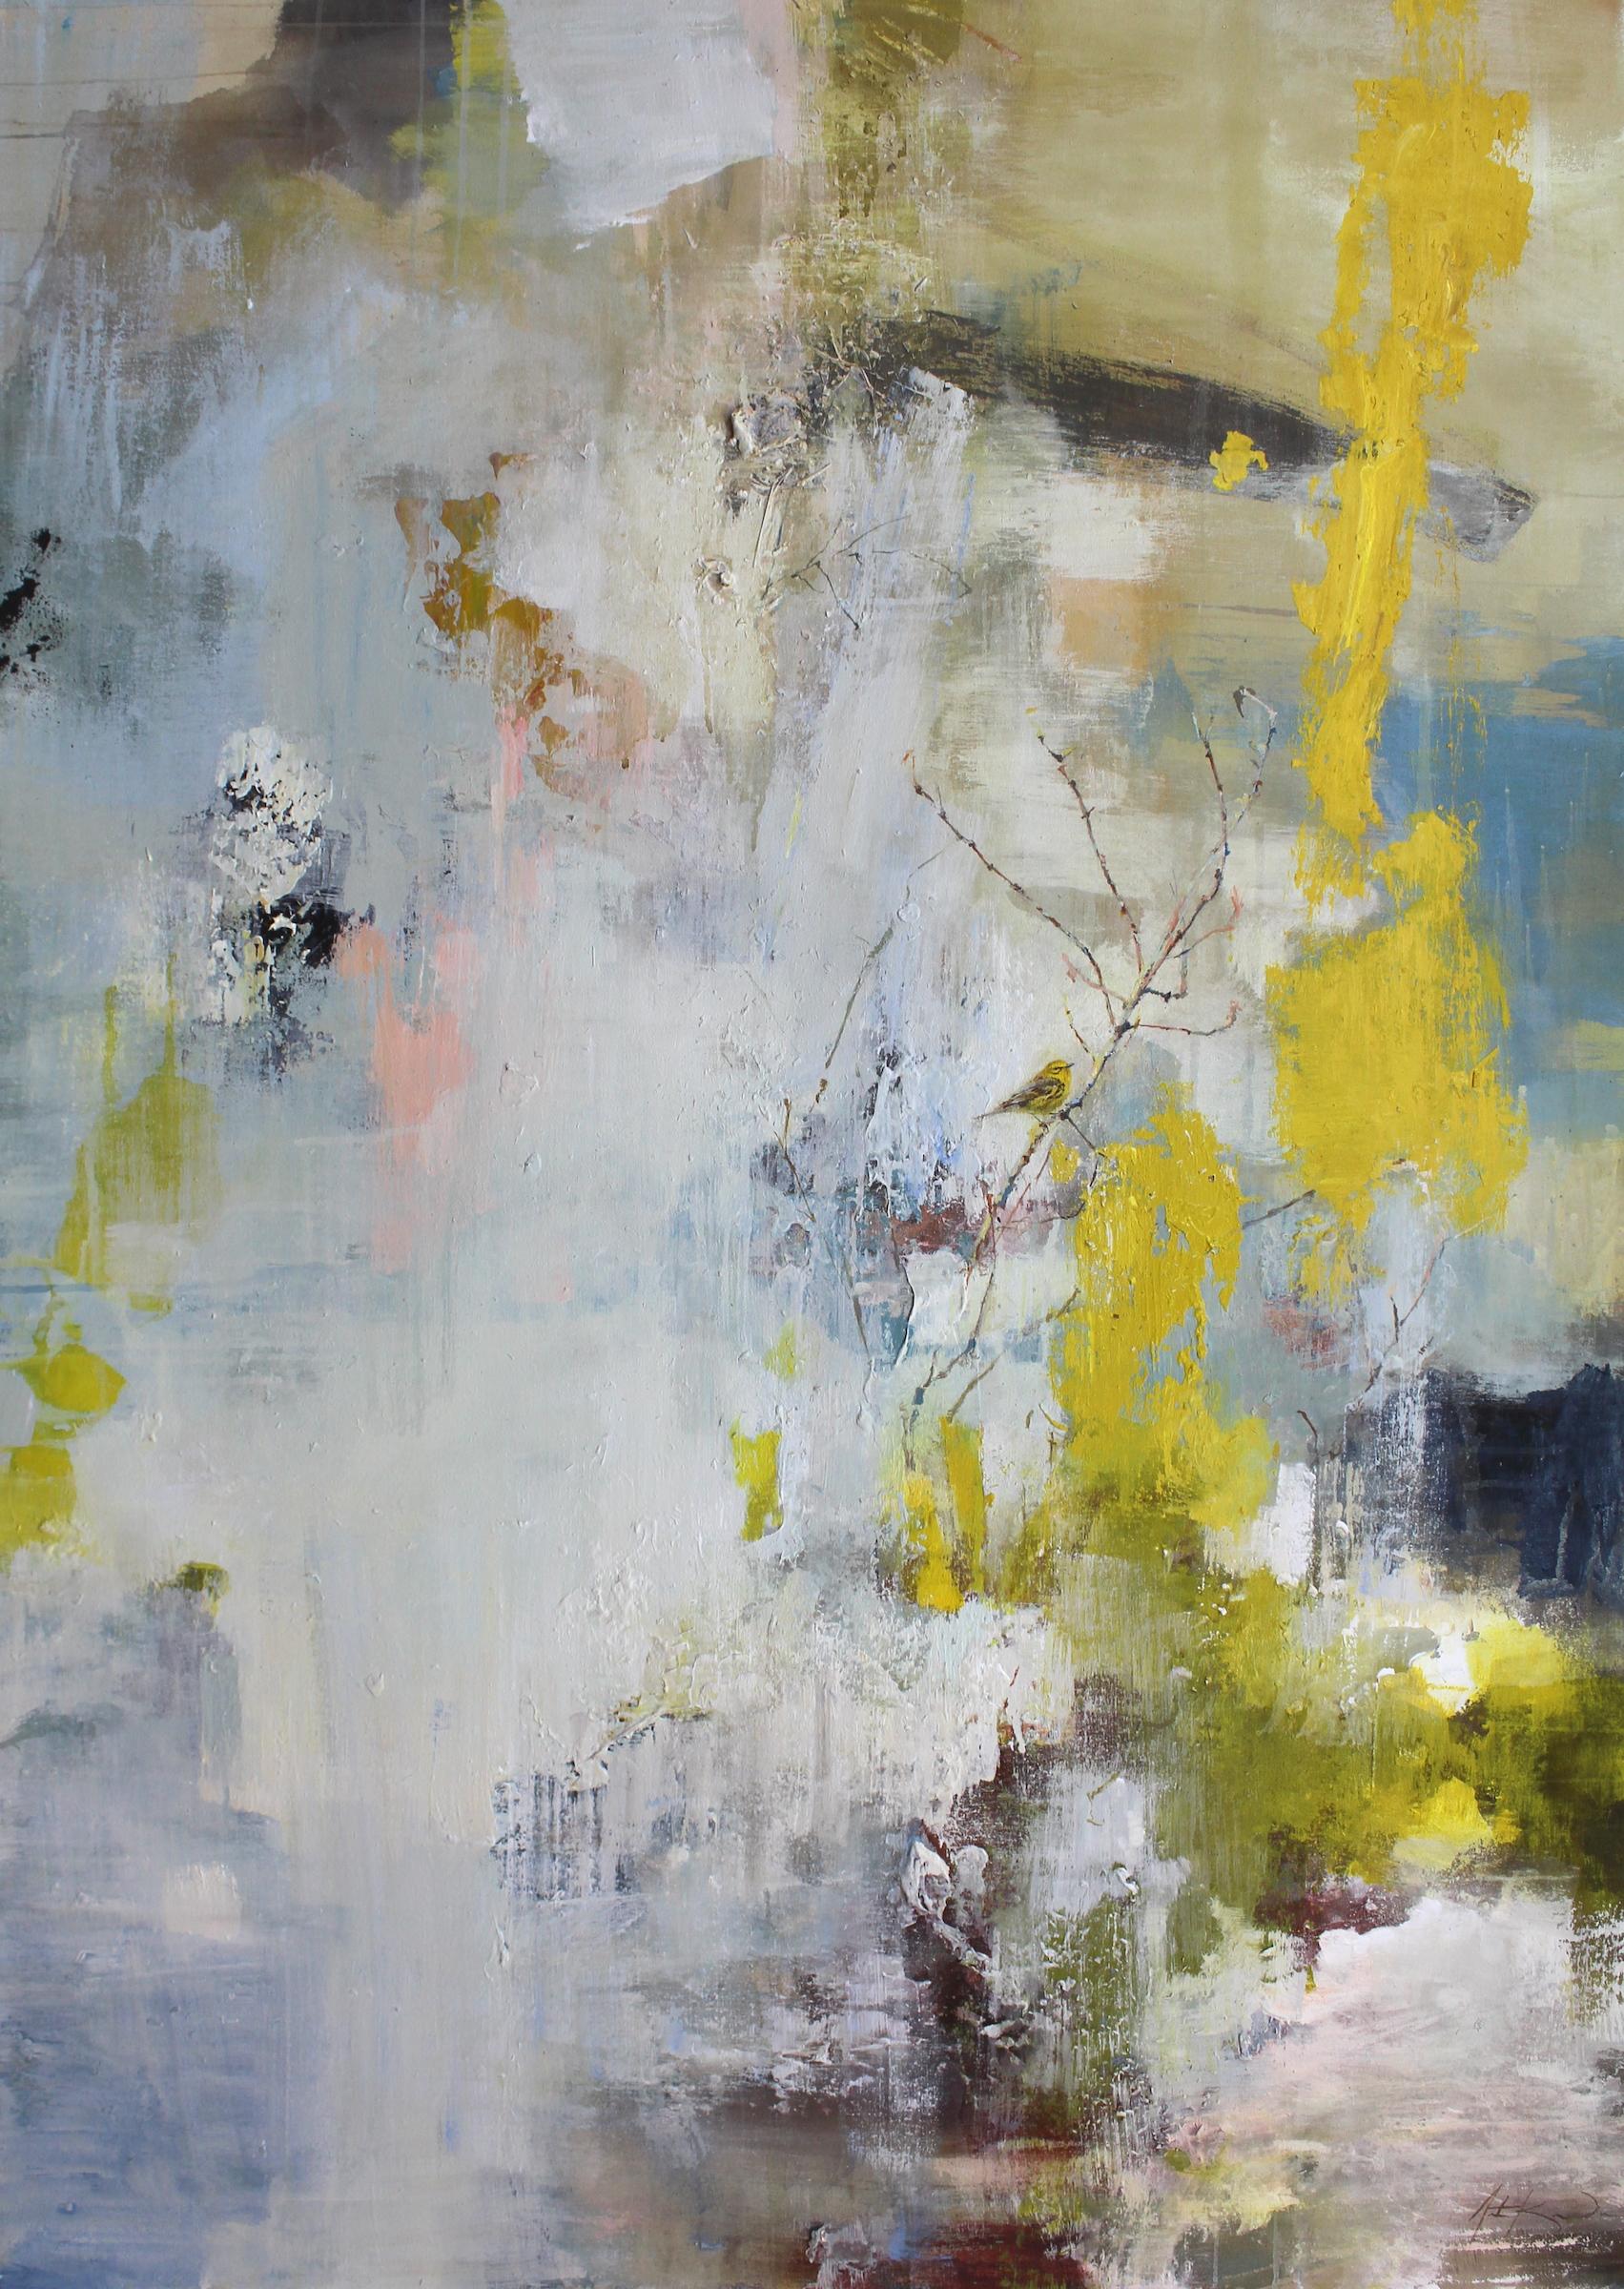 'Did you Hear the Sound? (Prairie Warbler) is a large vertical mixed media on canvas abstract painting created by American artist Justin Kellner in 2019. Featuring a palette made of yellow, grey, blue and brown tones, the painting presents an